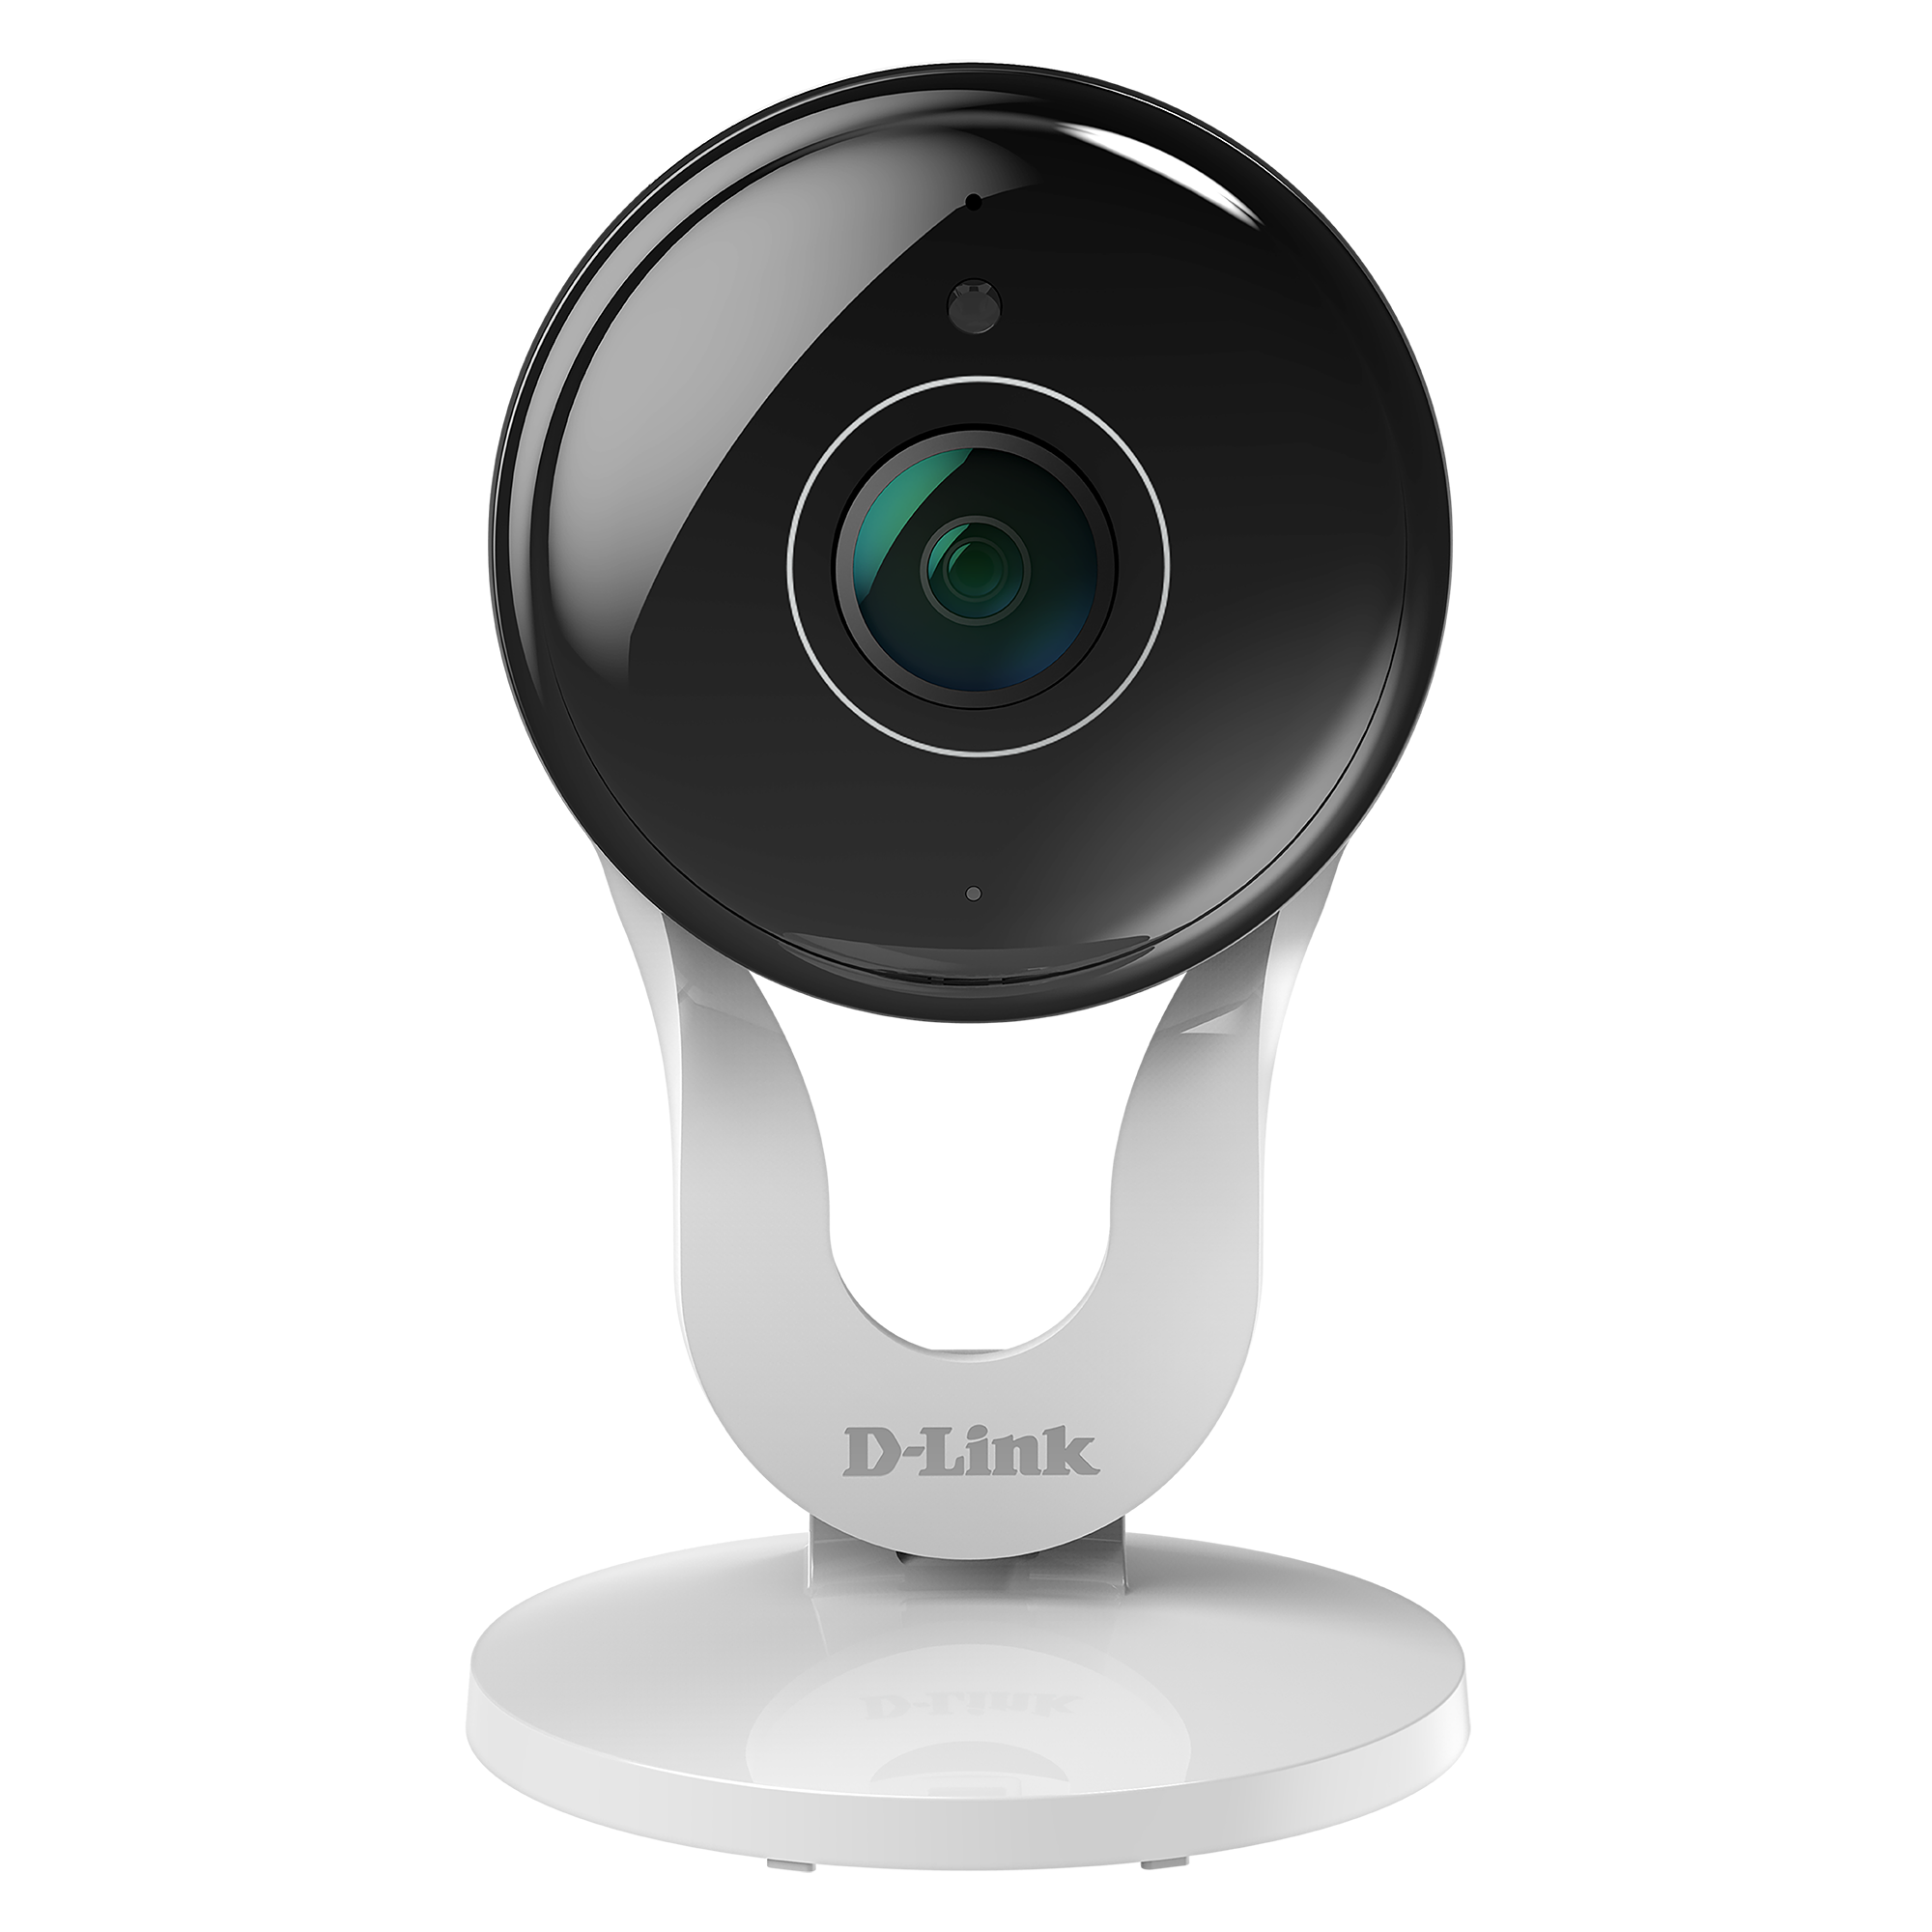 D-Link 1080p Wi-Fi Indoor Security Camera (DCS-8300LH-WM), Wireless, Qty 1 - image 1 of 4